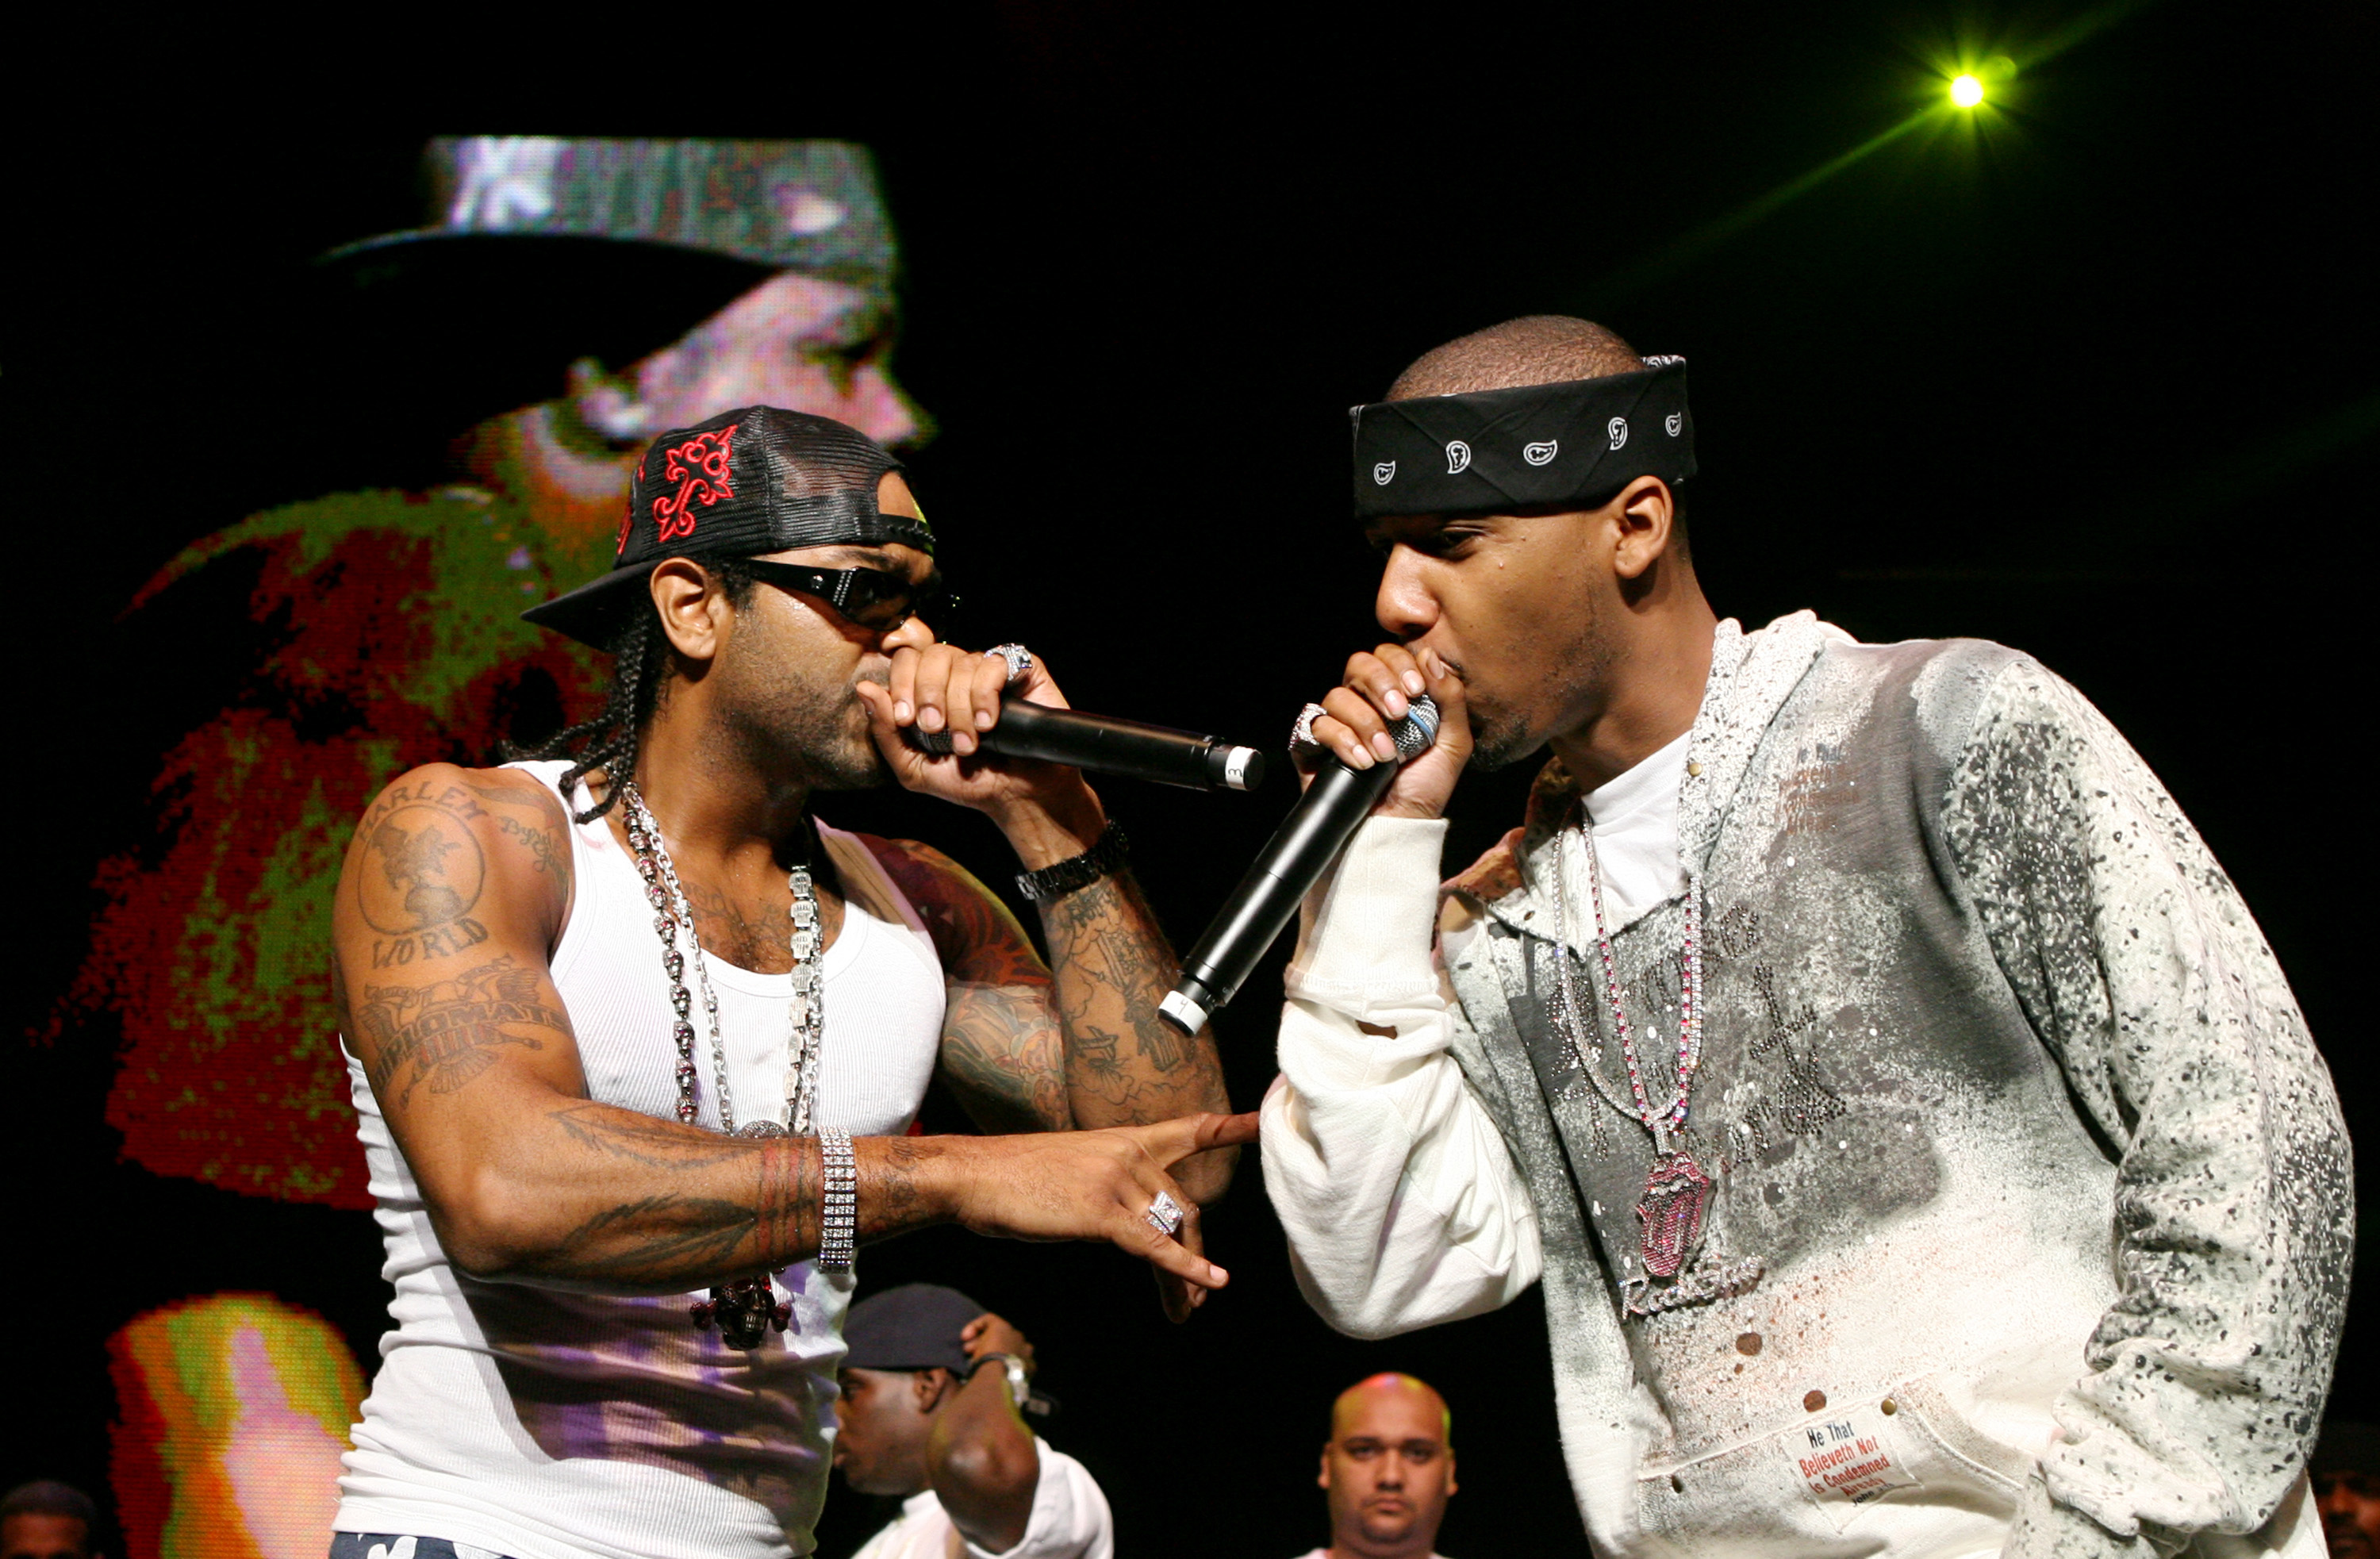 Cam'ron Calls Kanye West an "Uncle Tom" on the New Dipset Album